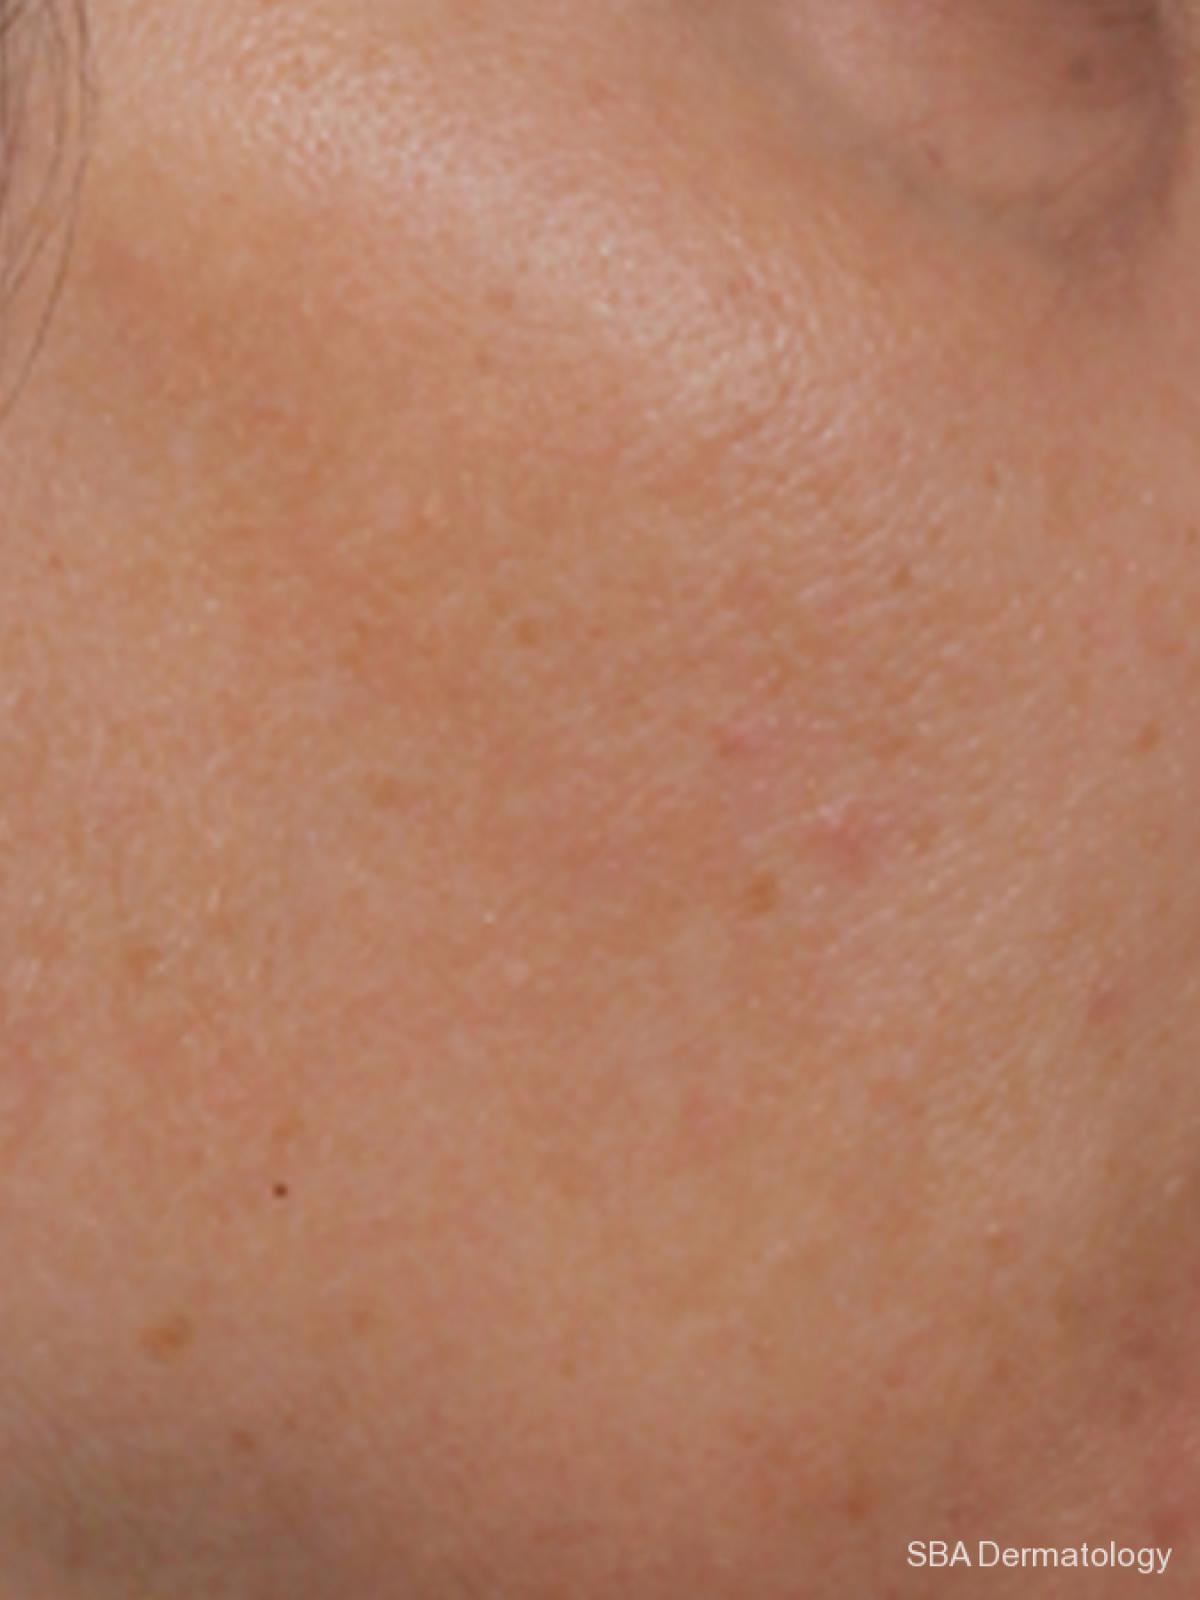 Microneedling: Patient 1 - After 1